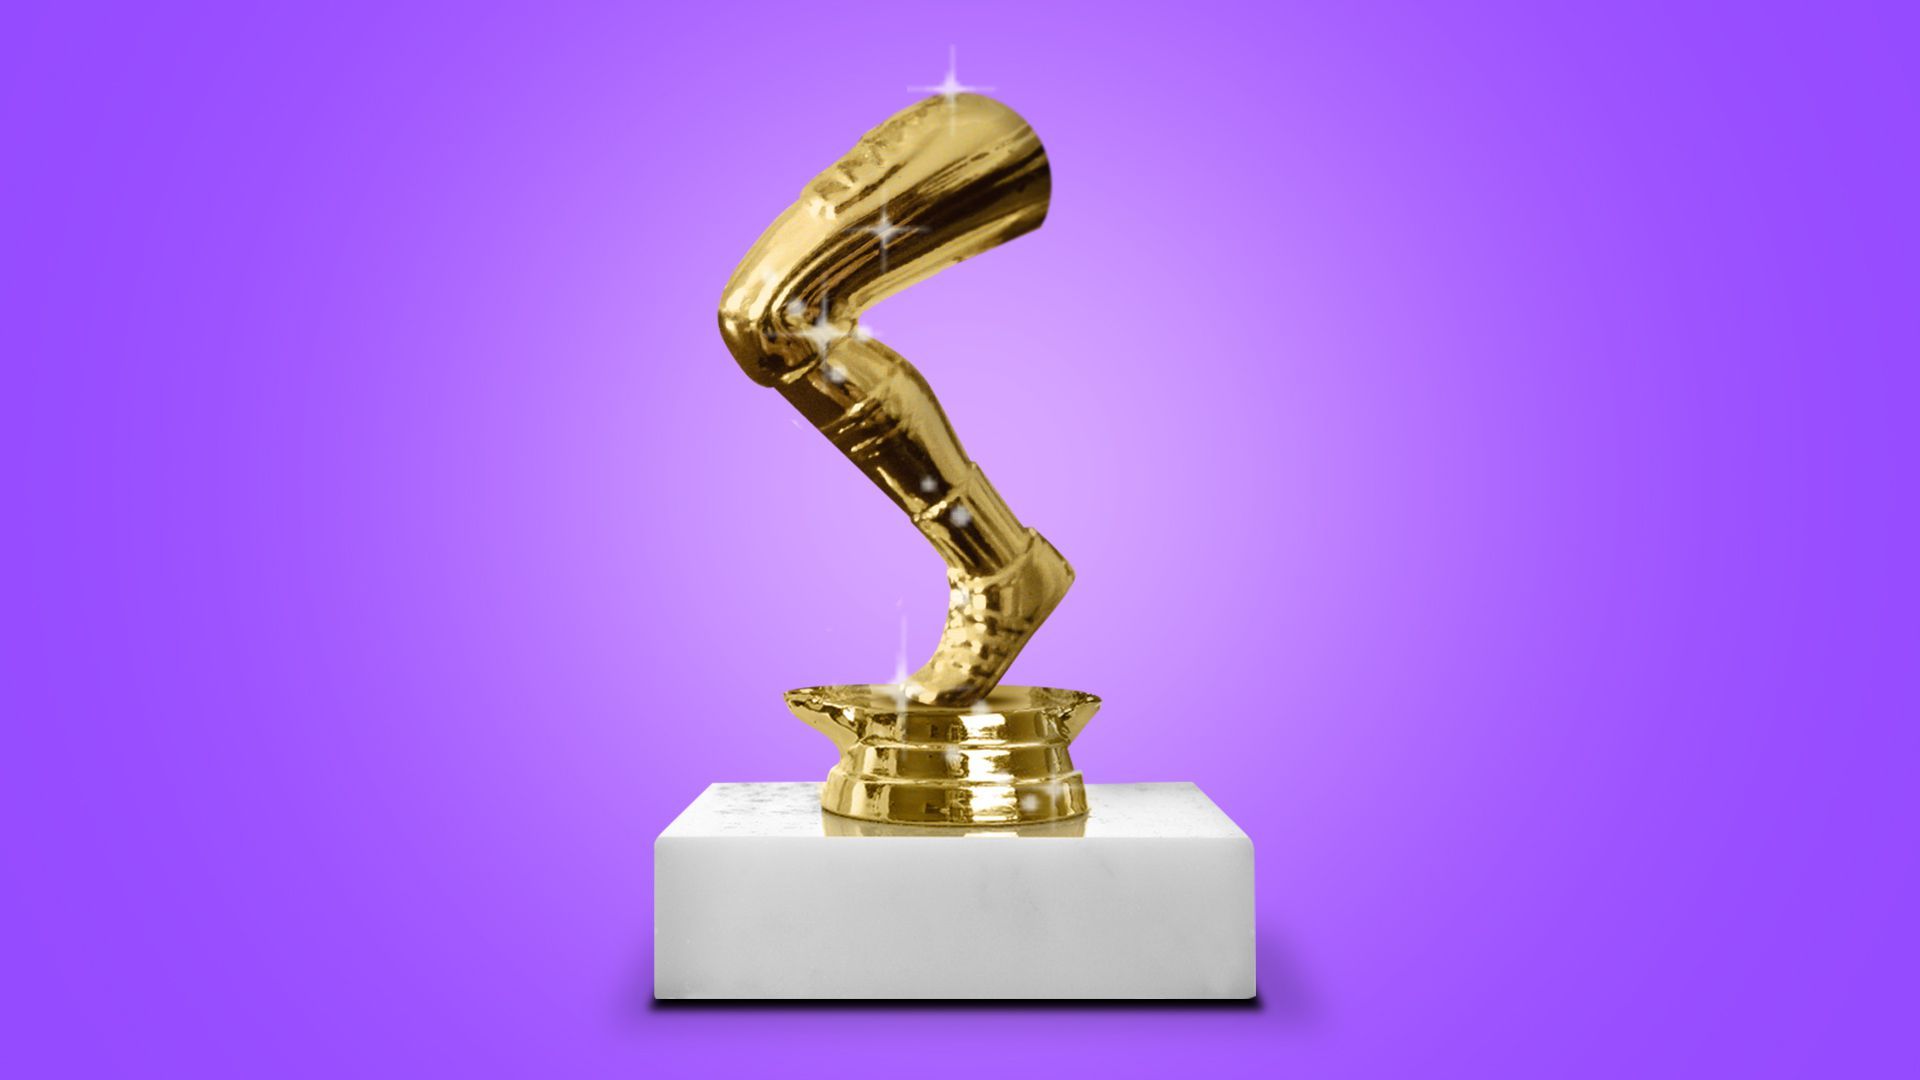 Illustration of a trophy made of just a golden leg. 